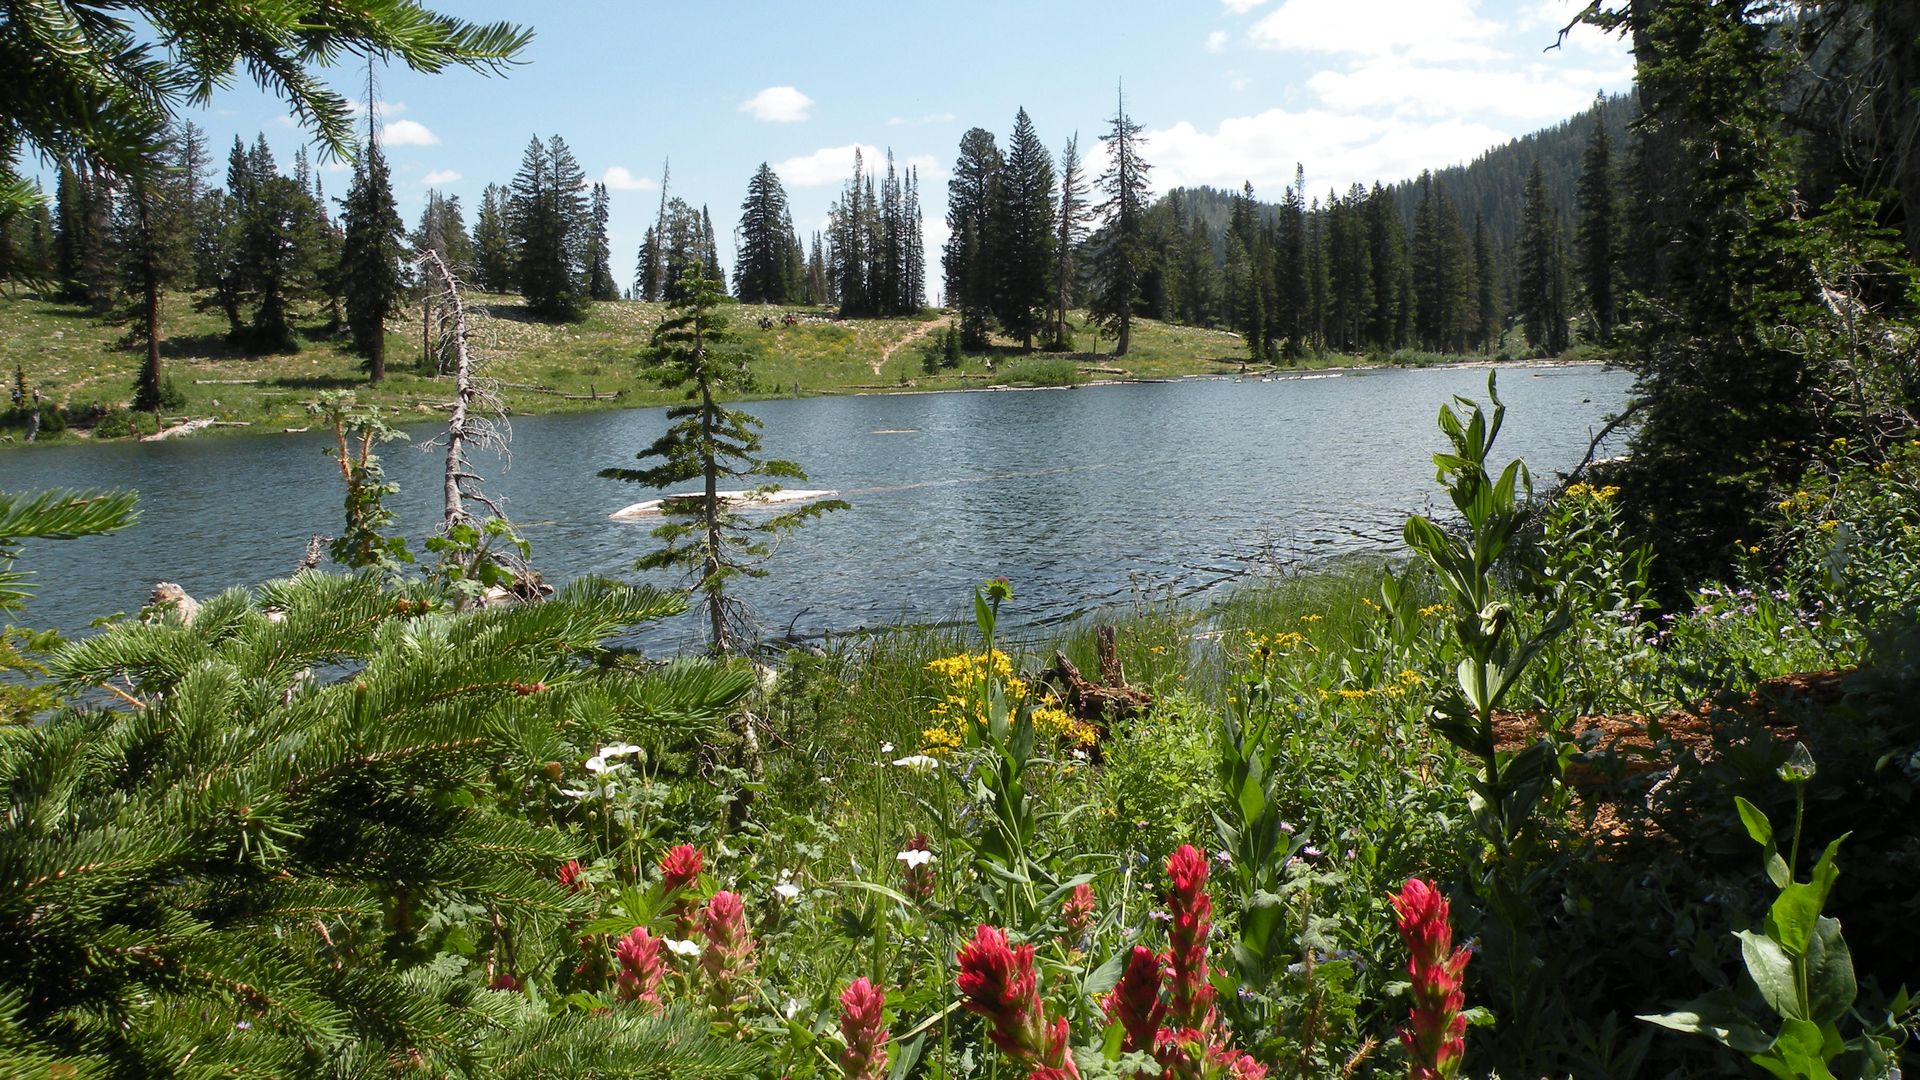 A mountain lake surrounded by peaks and wildflowers